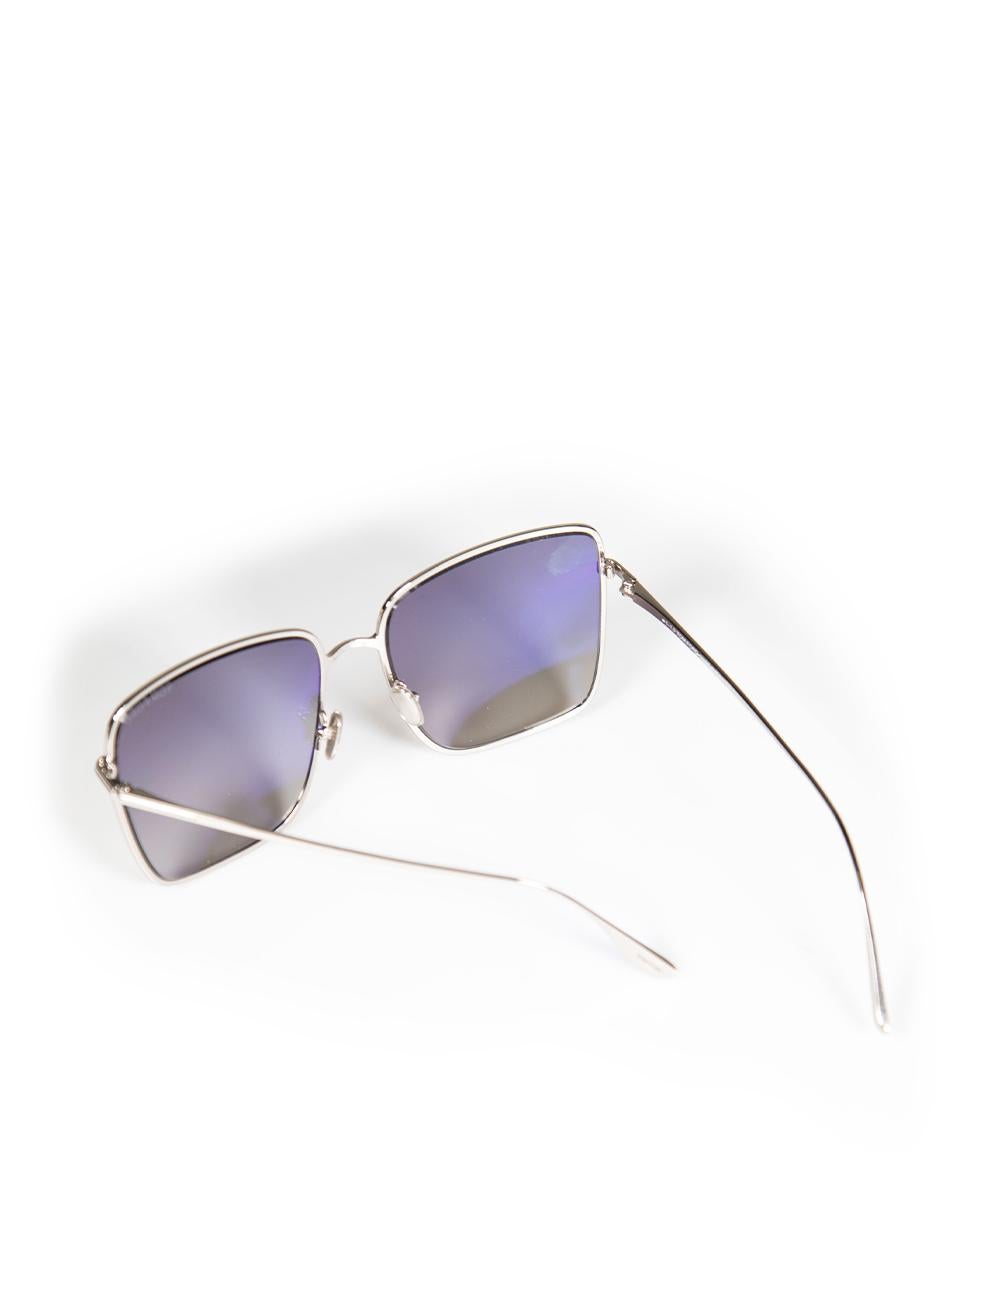 Tom Ford Heather Grey Smoke Square Sunglasses For Sale 3